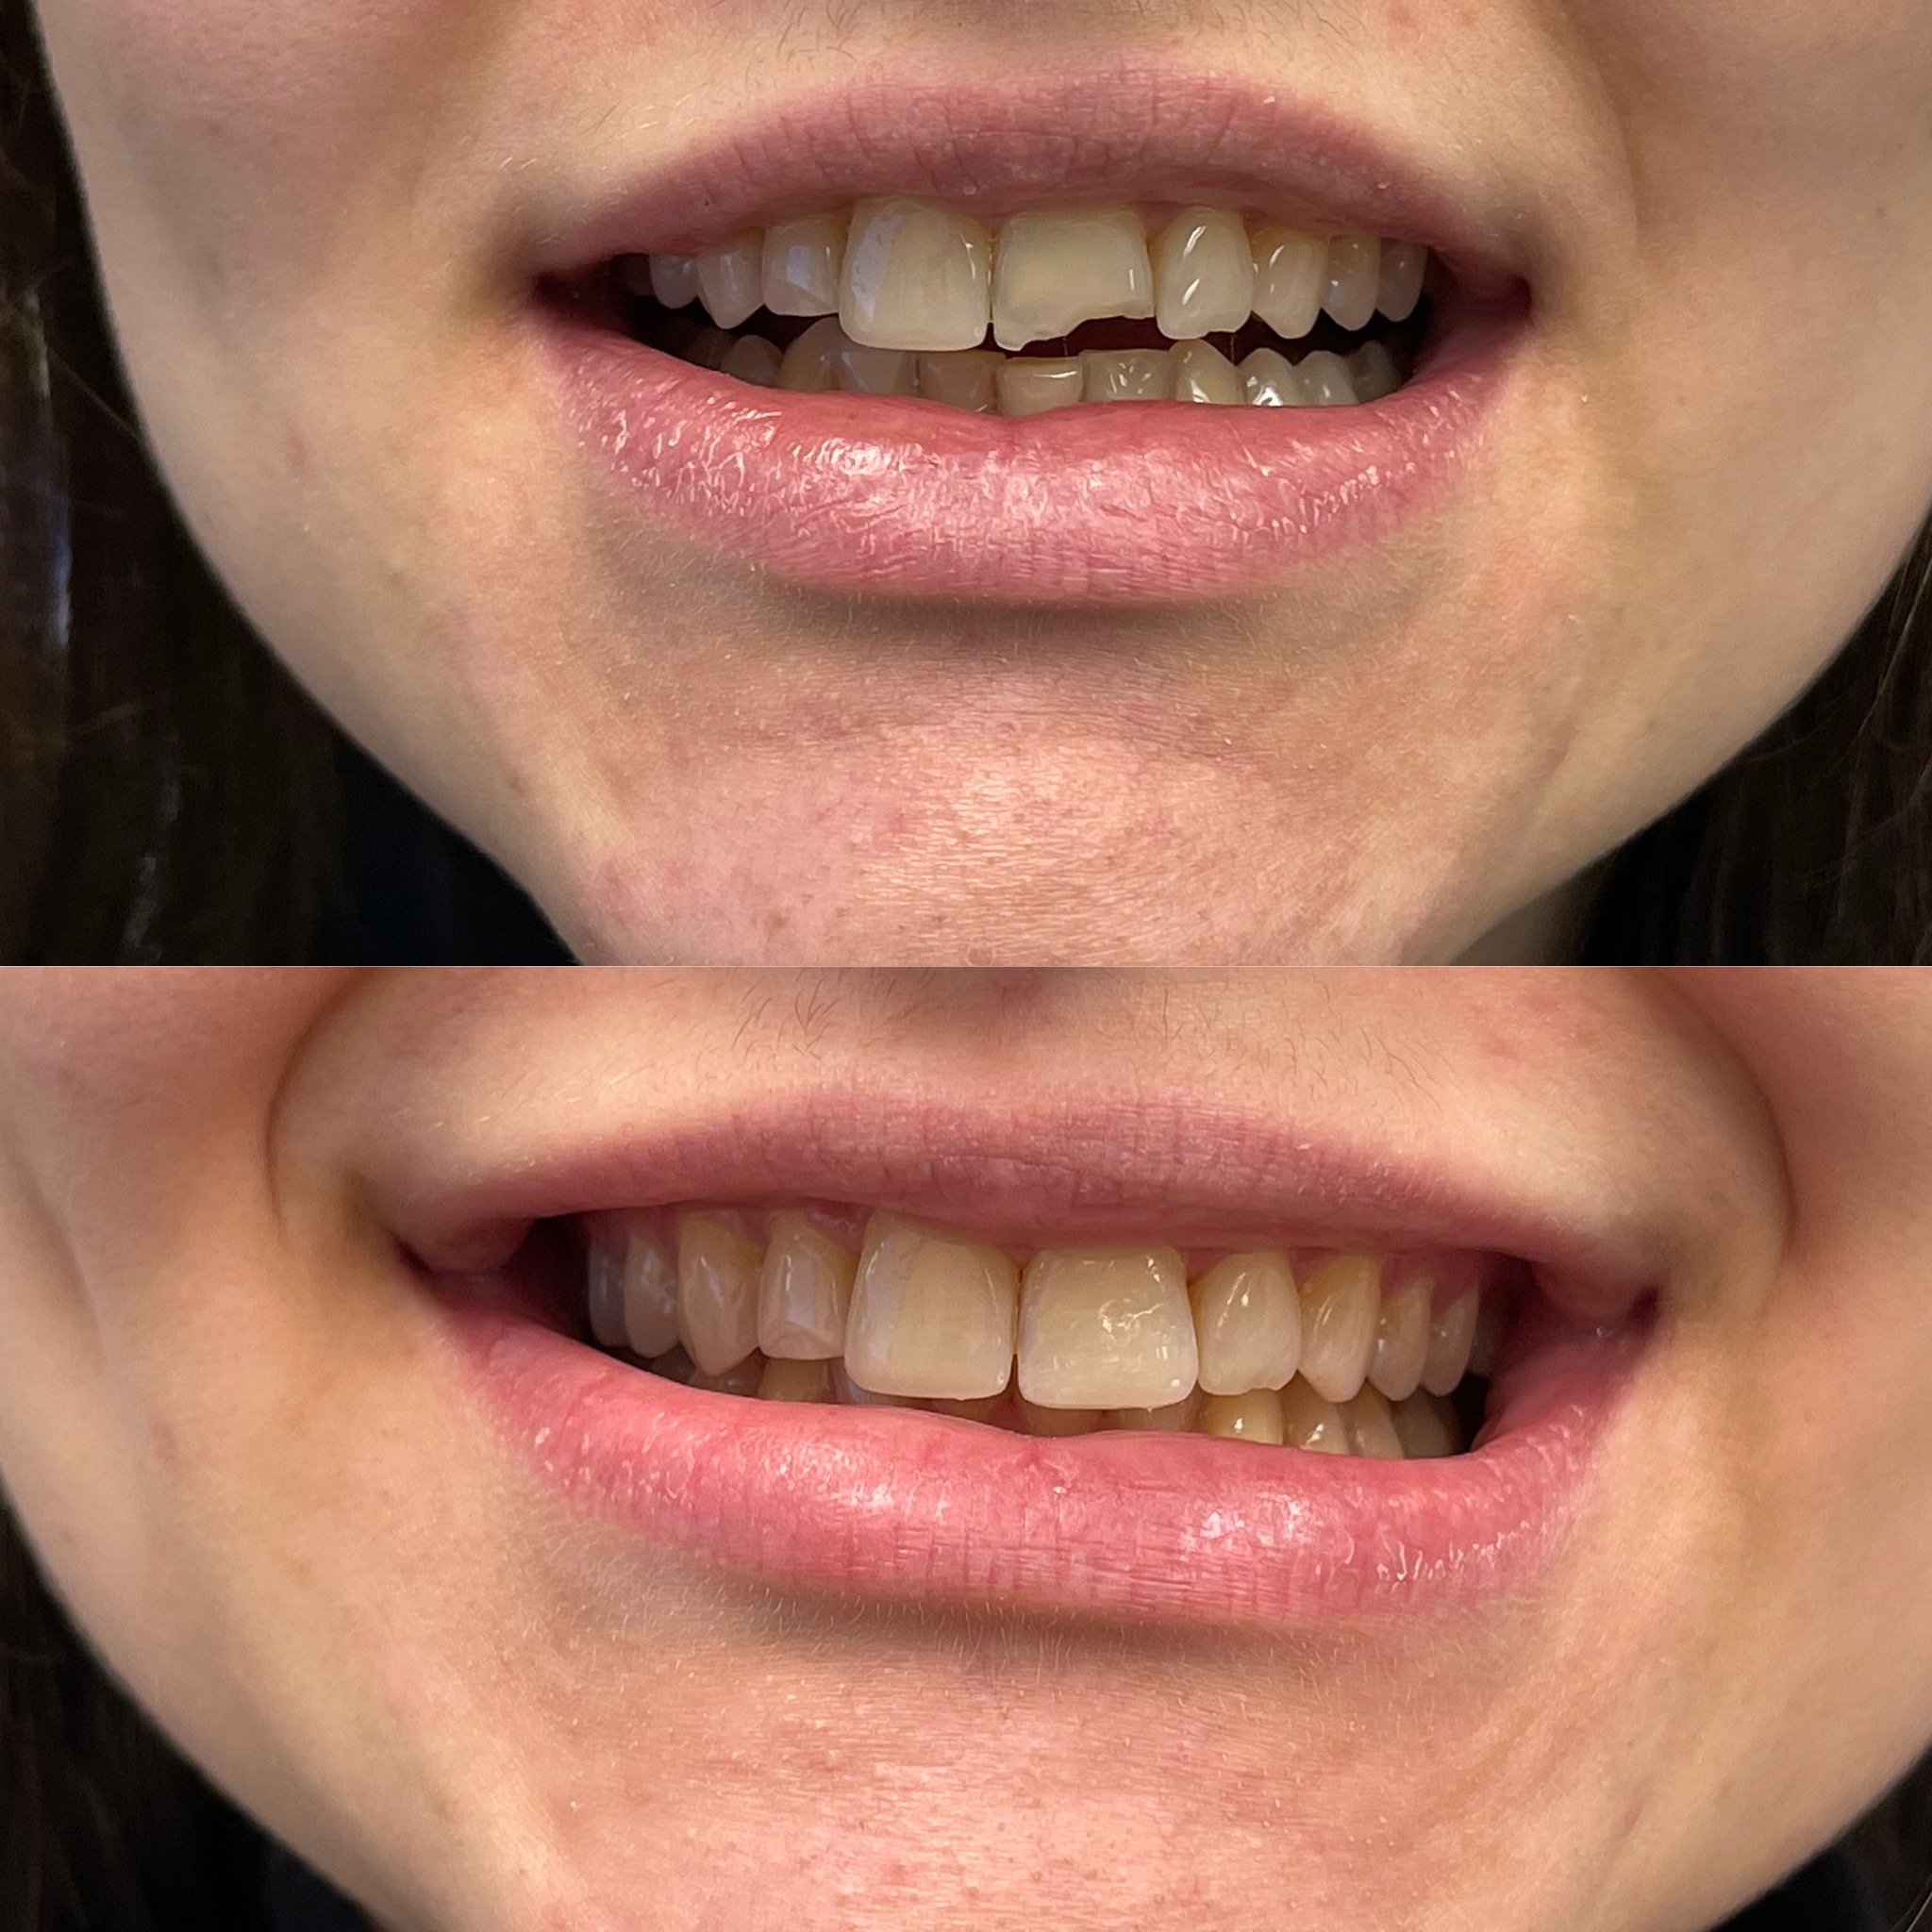 Give Dental - Woman Patient - Composite before and after